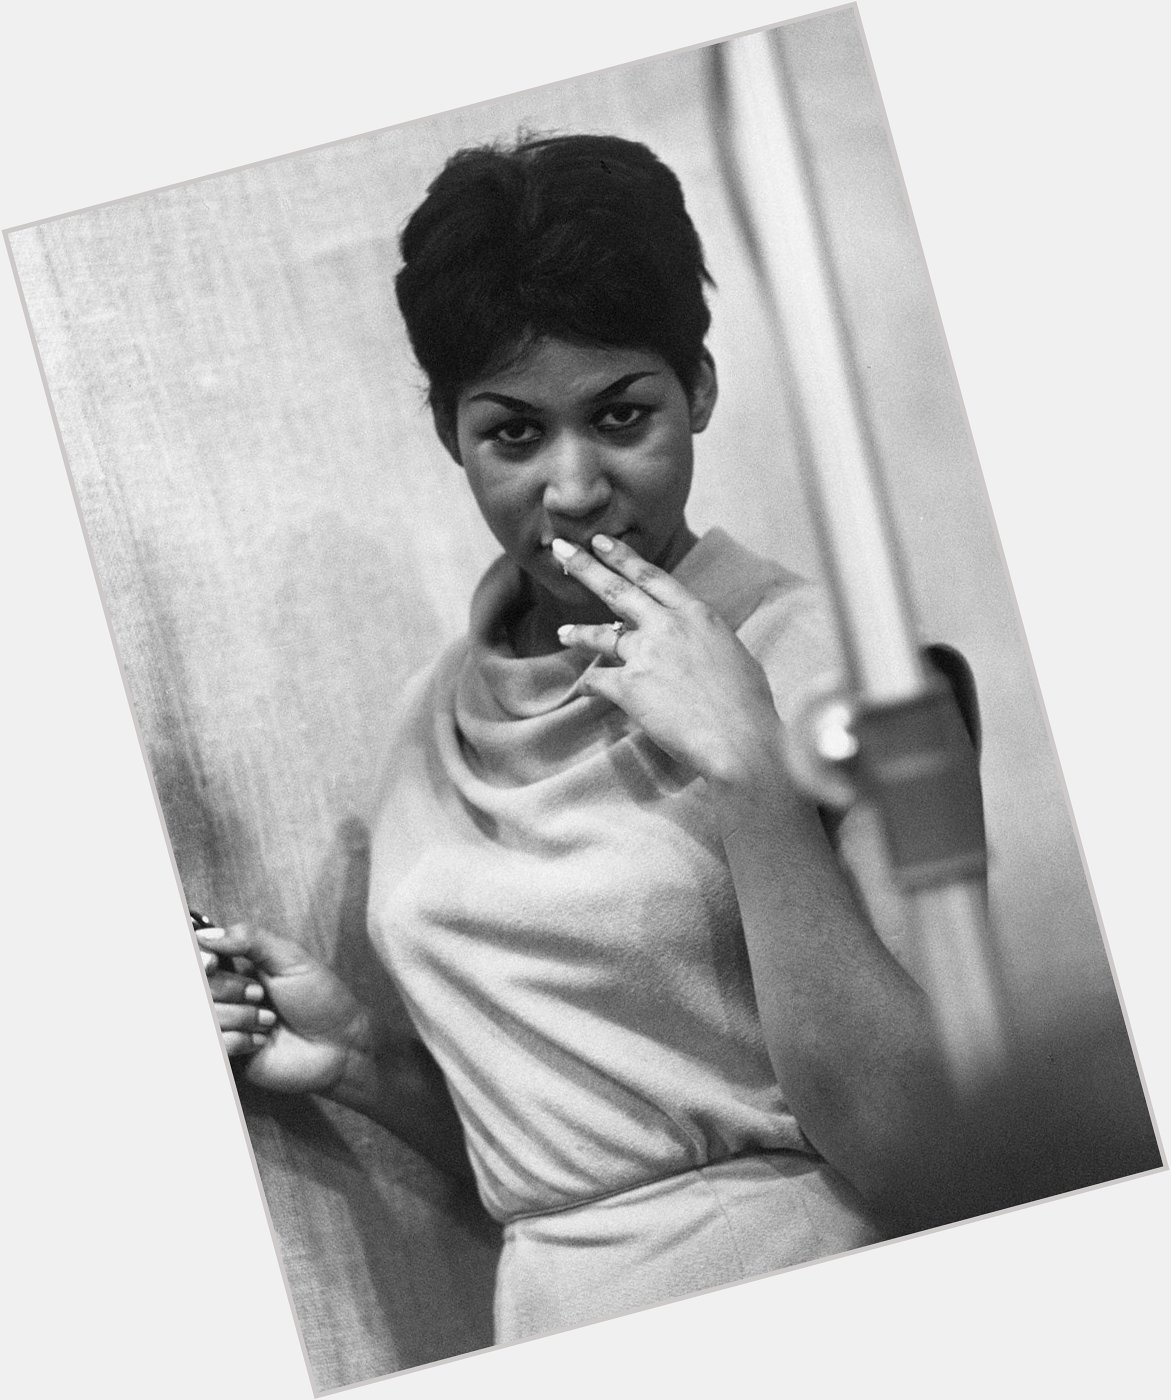 Happy 75th birthday to THE Queen of Soul Music, Aretha Franklin (March 25, 1942). 